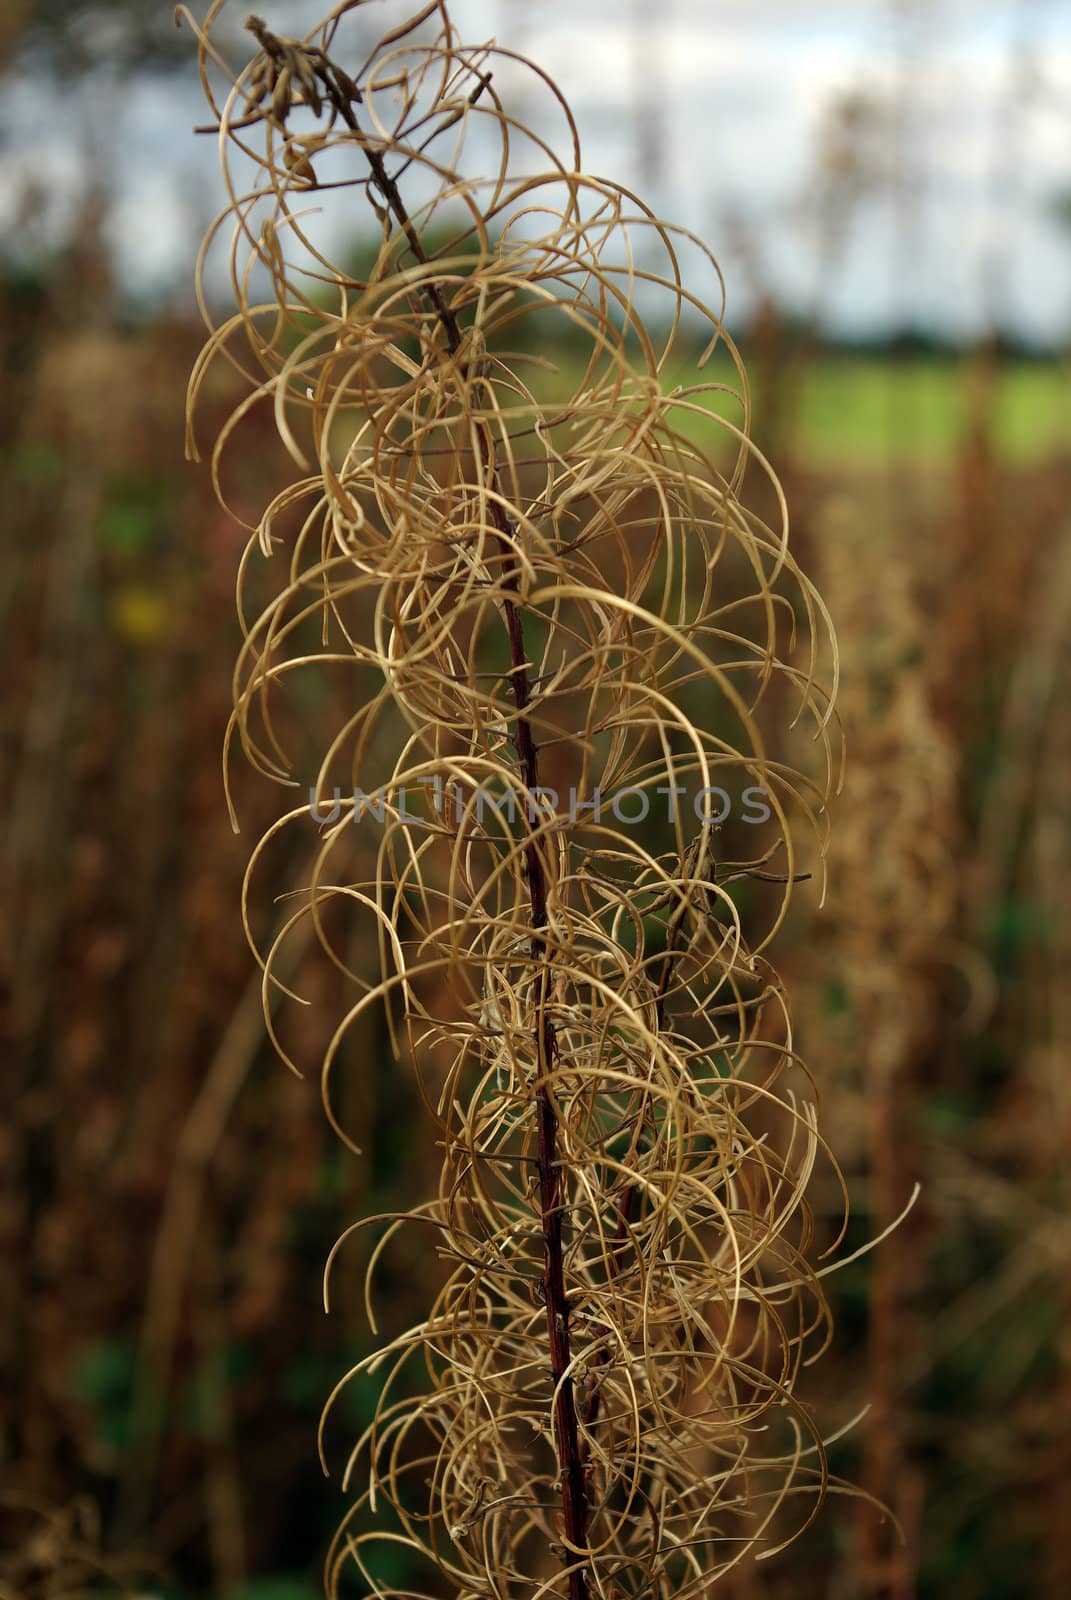 Spiralling plant growing in hedgerow in autumn by stu49